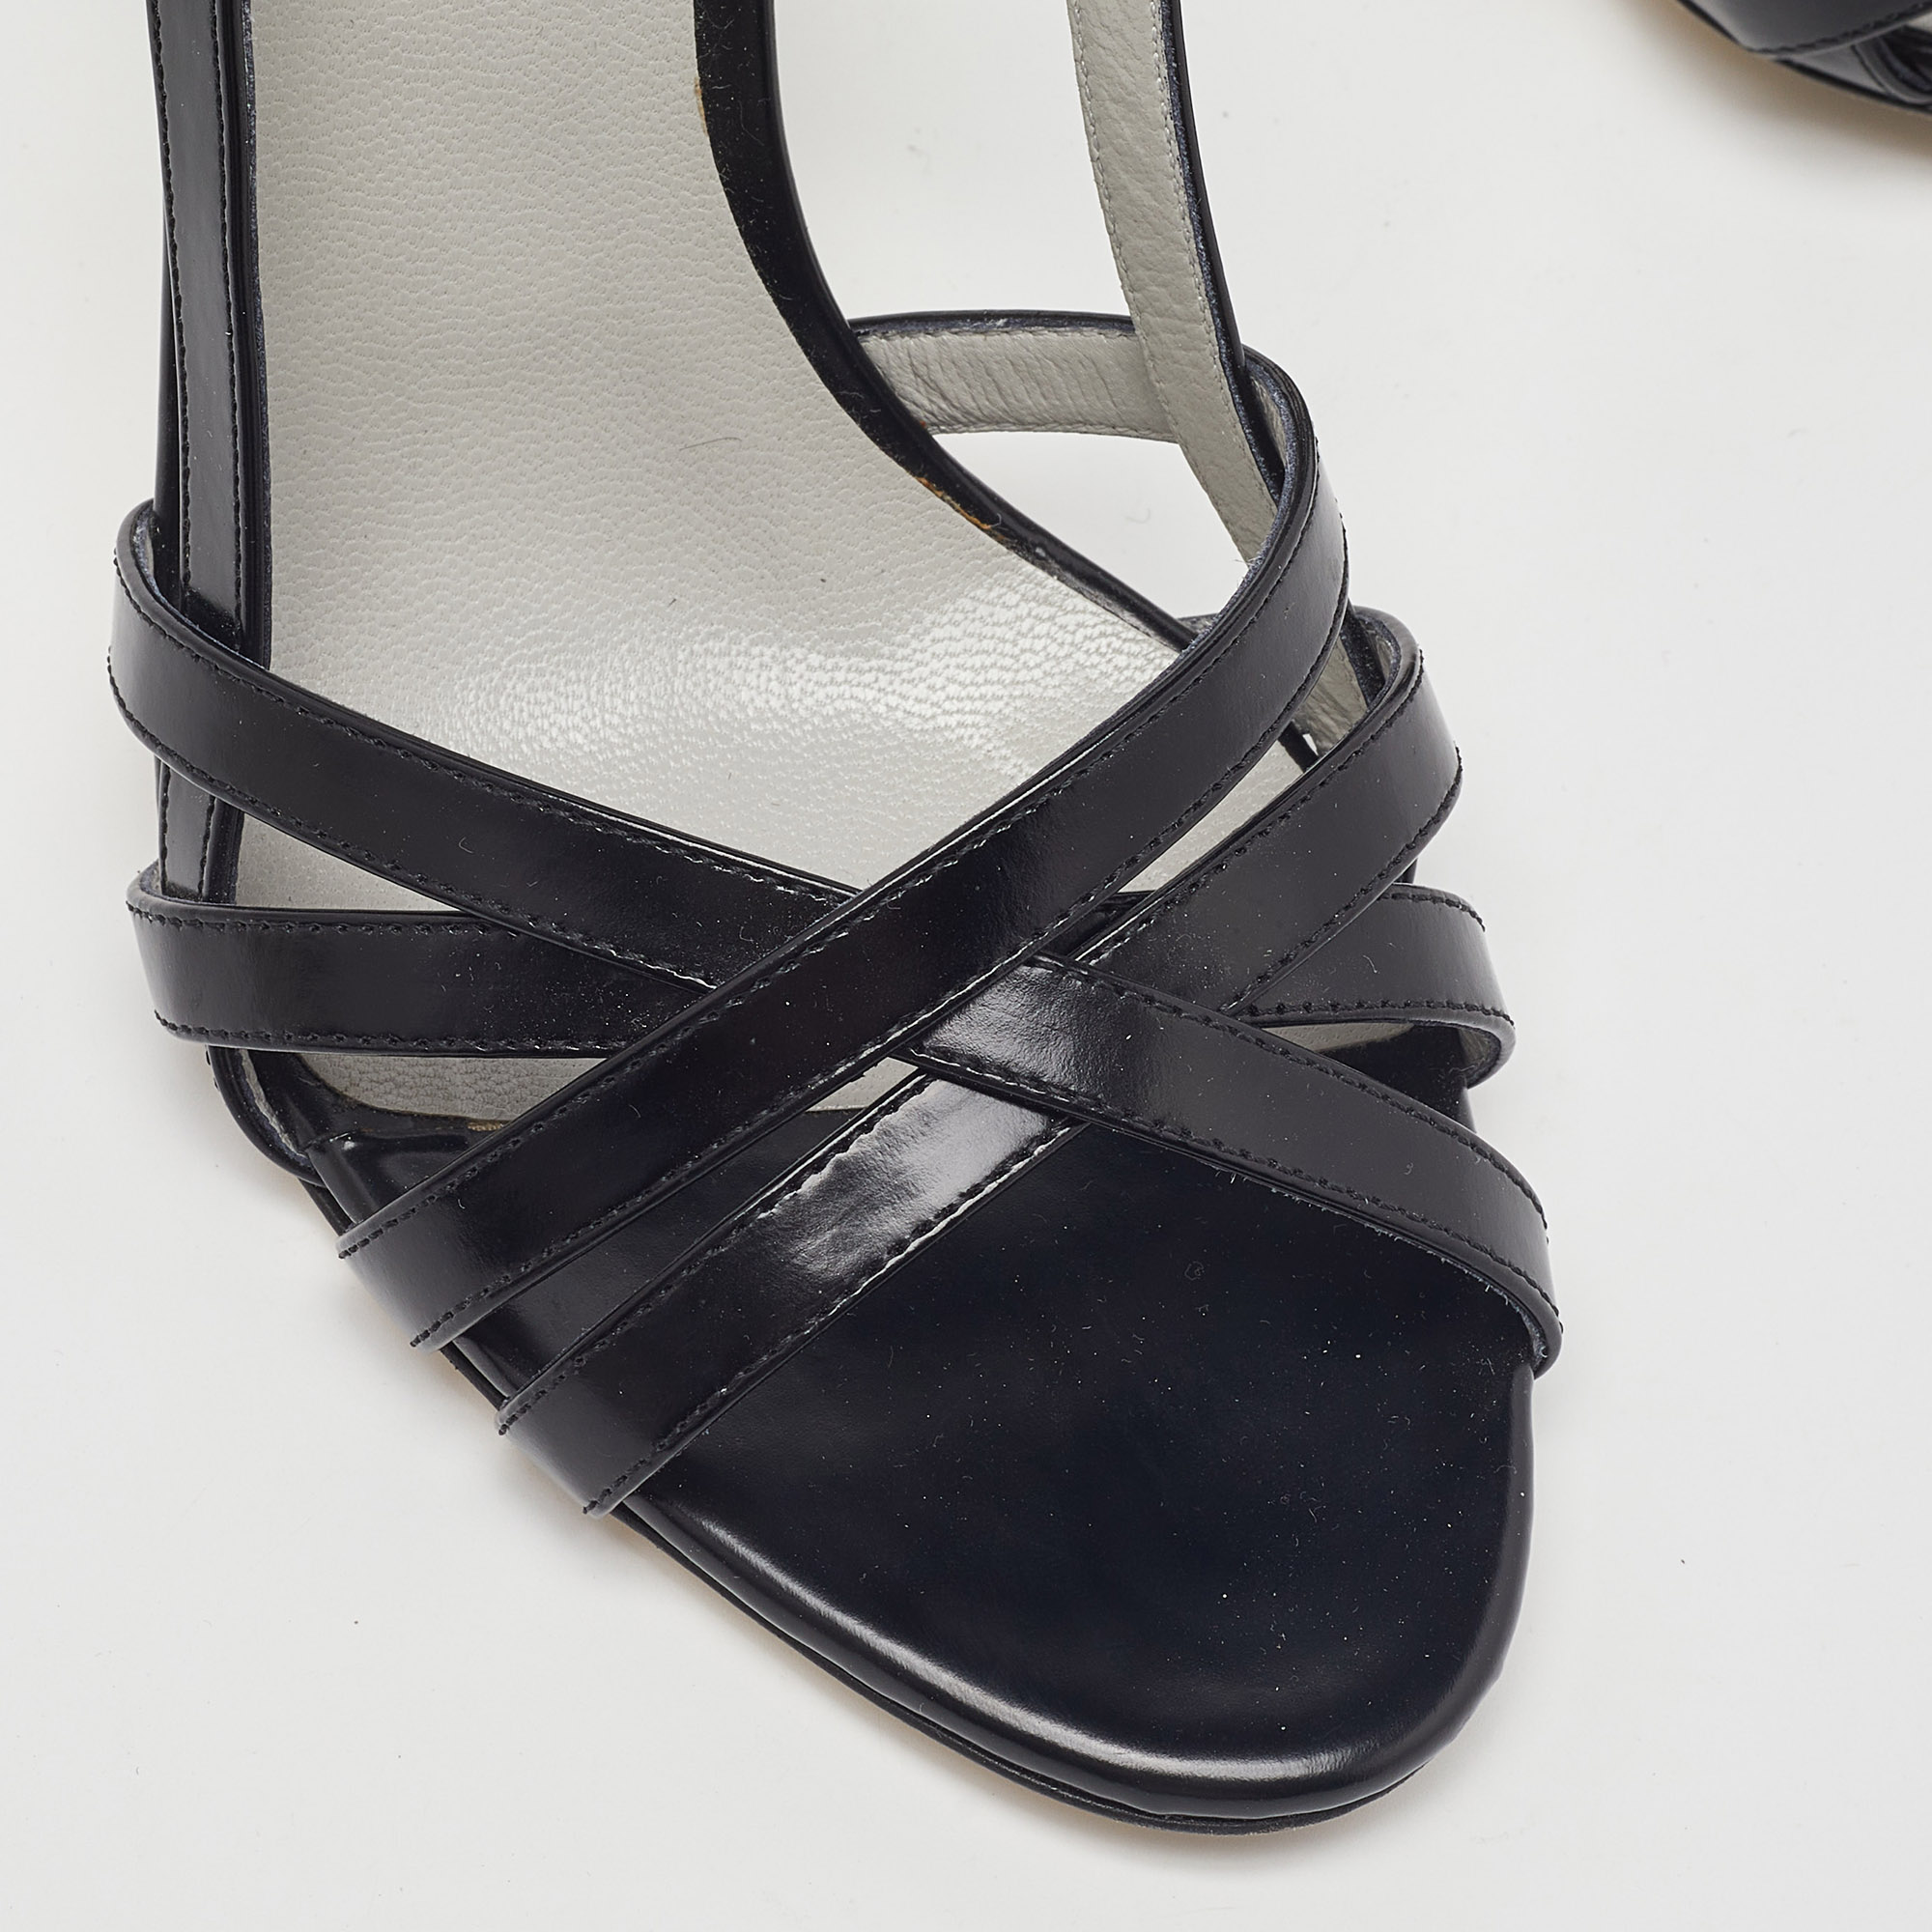 D&G Black Leather Strappy Slingback Sandals Size 39